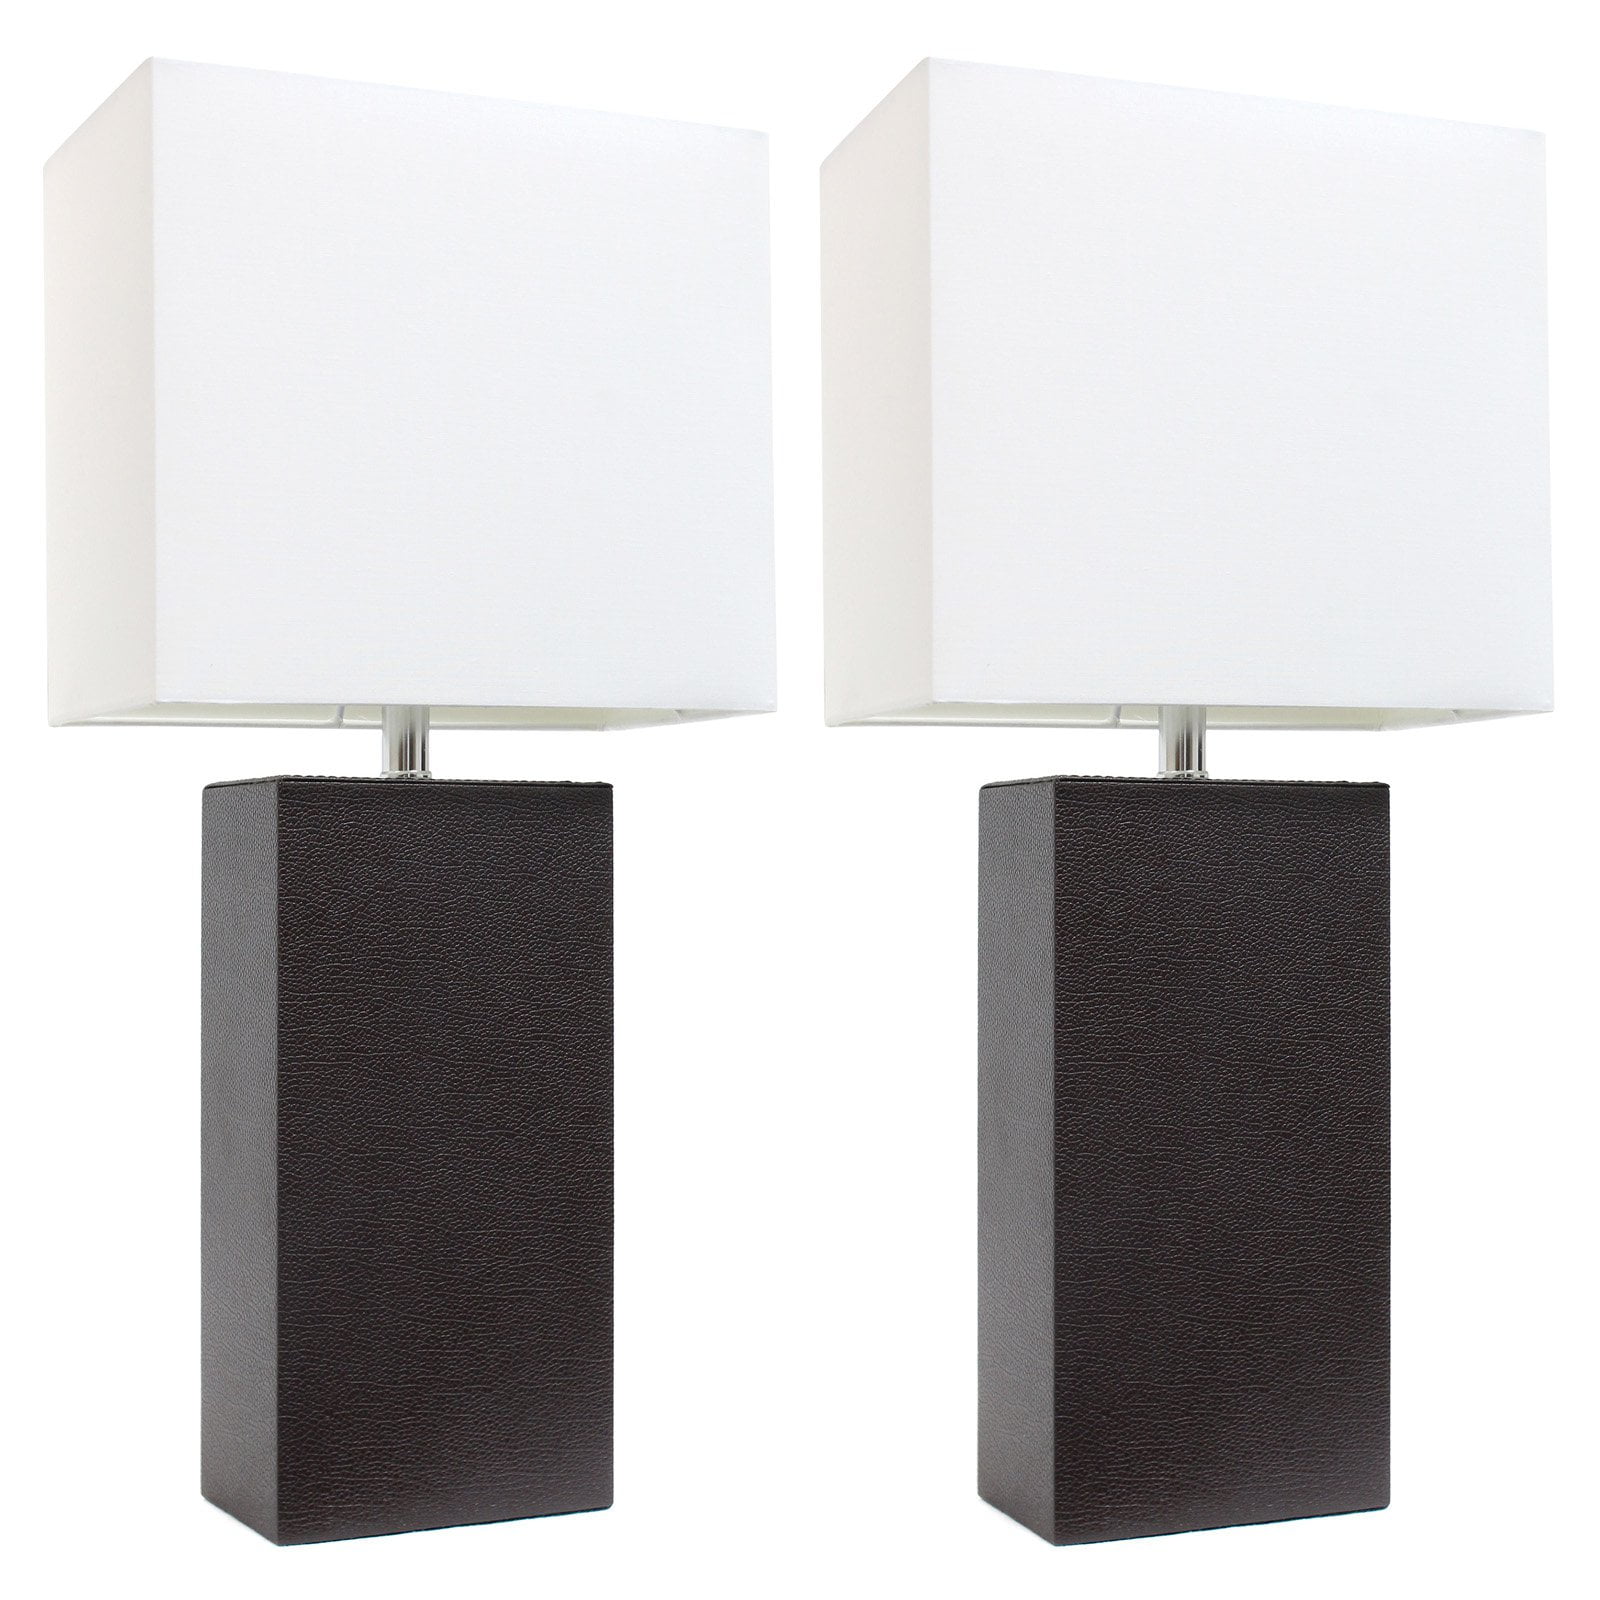 Elegant Designs 2 Pack Modern Leather Table Lamps with White Fabric Shades, Espresso Brown